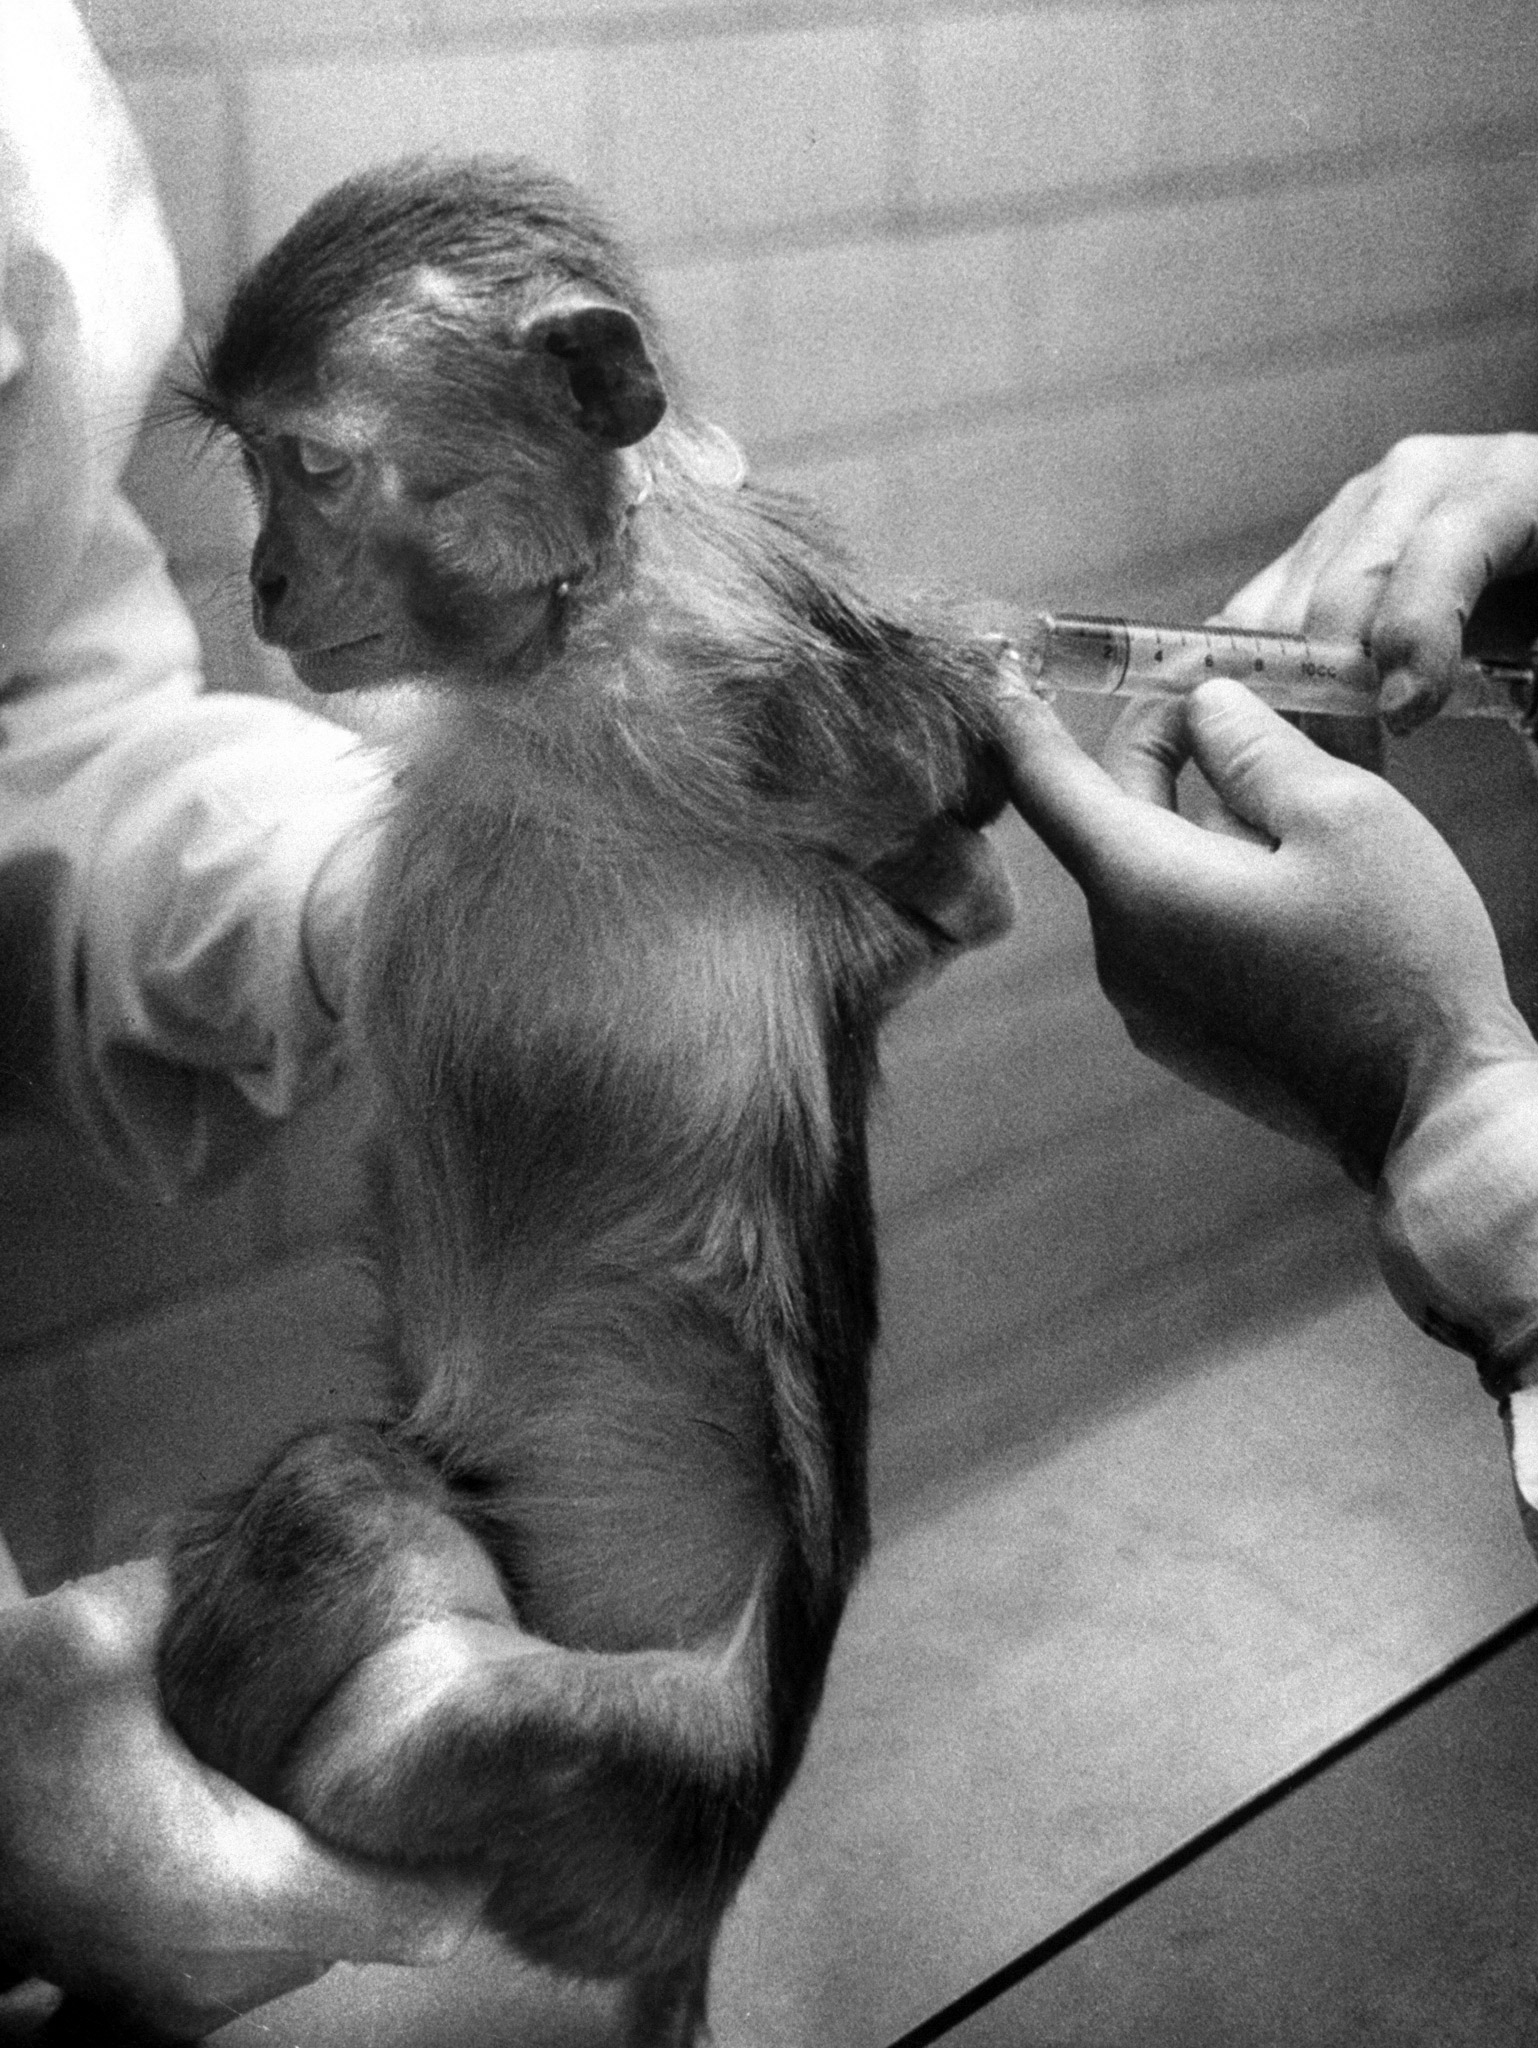 Potency test is performed with monkey who gets injections of vaccine just as children. Blood sample is examined to see if antibodies have formed.